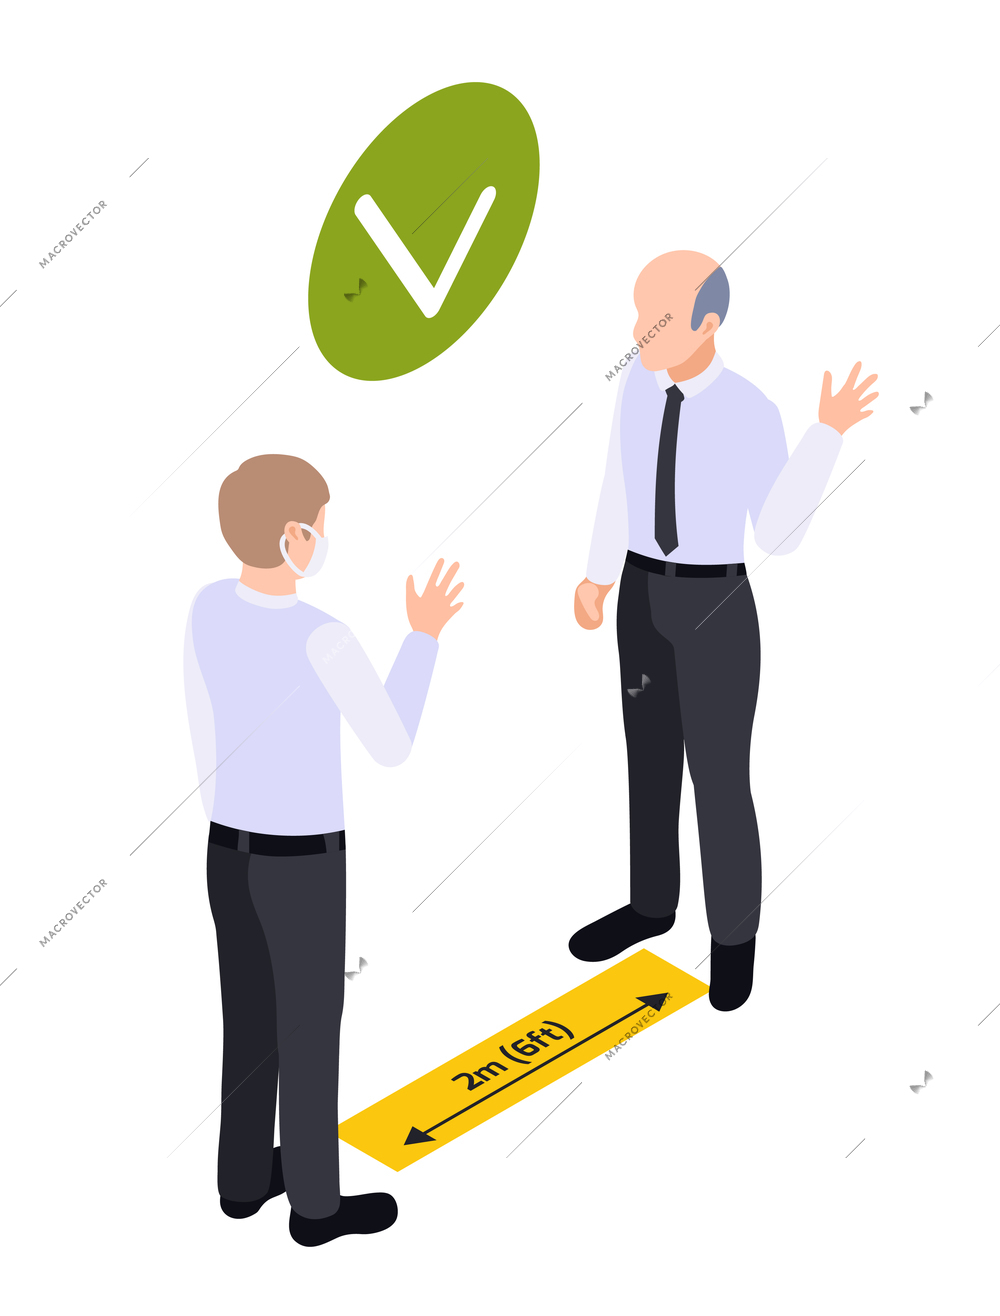 Social distancing for people in public areas isometric vector illustration